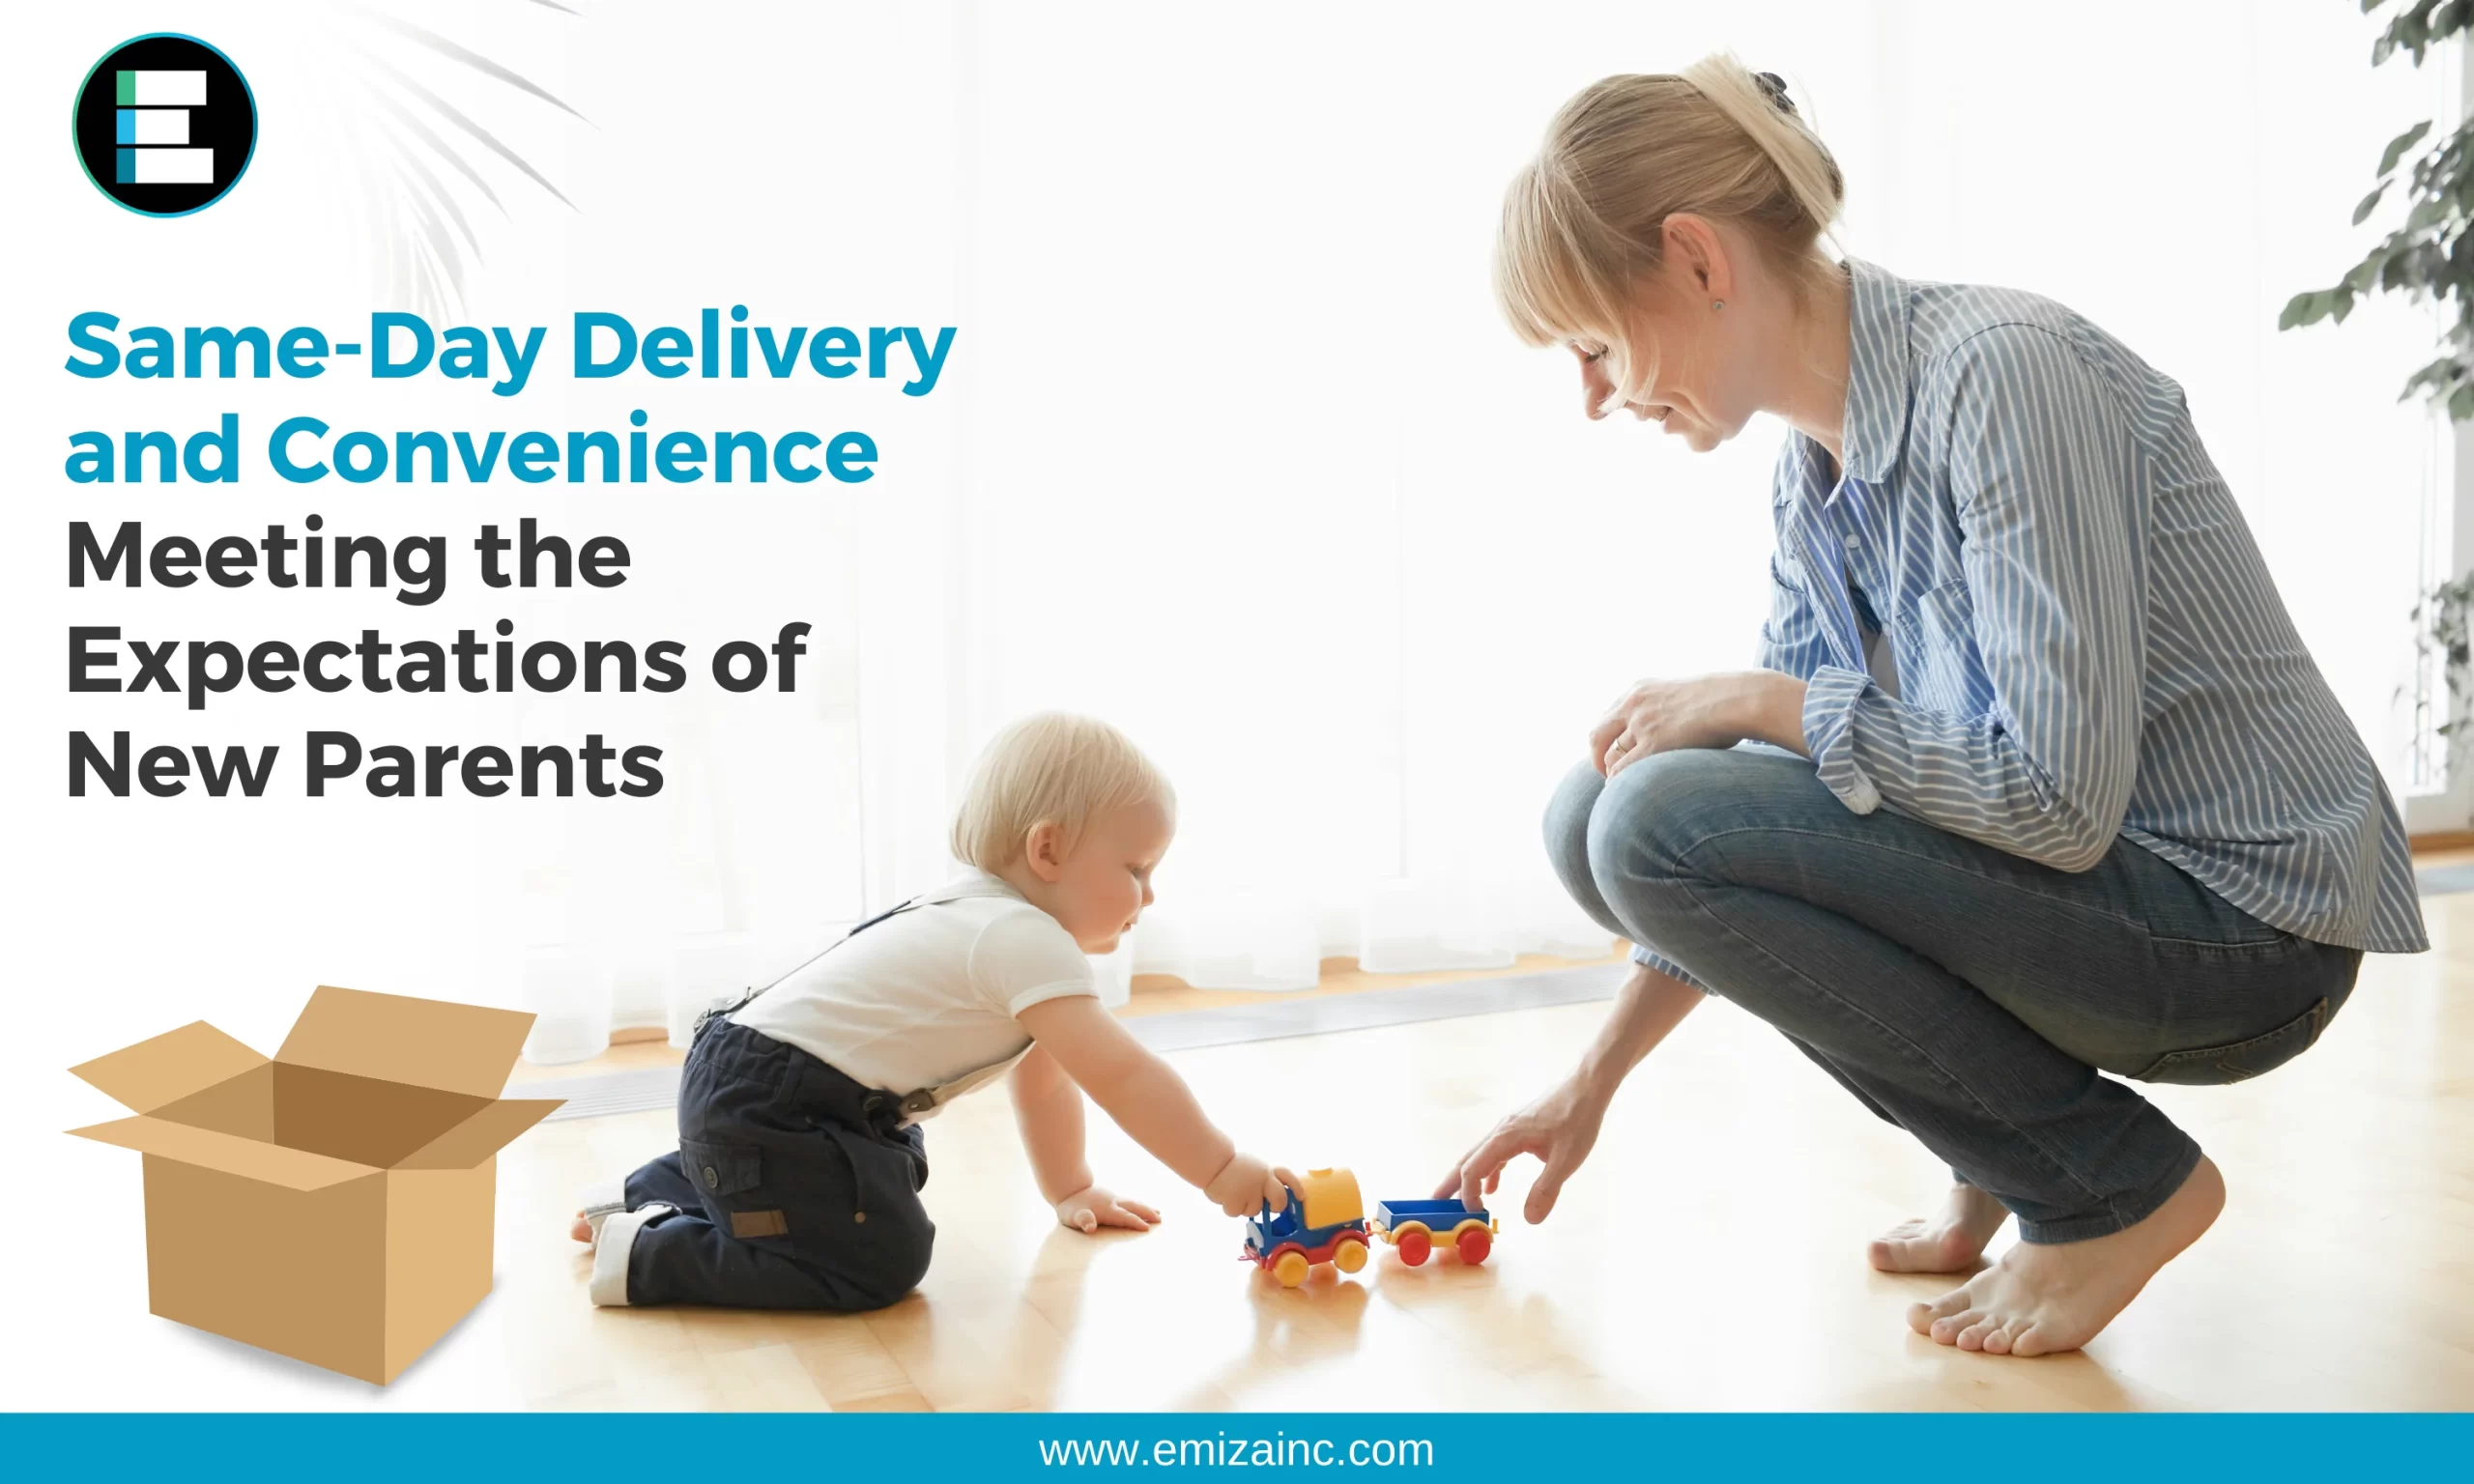 Same-Day Delivery and Convenience Meeting the Expectations of New Parents